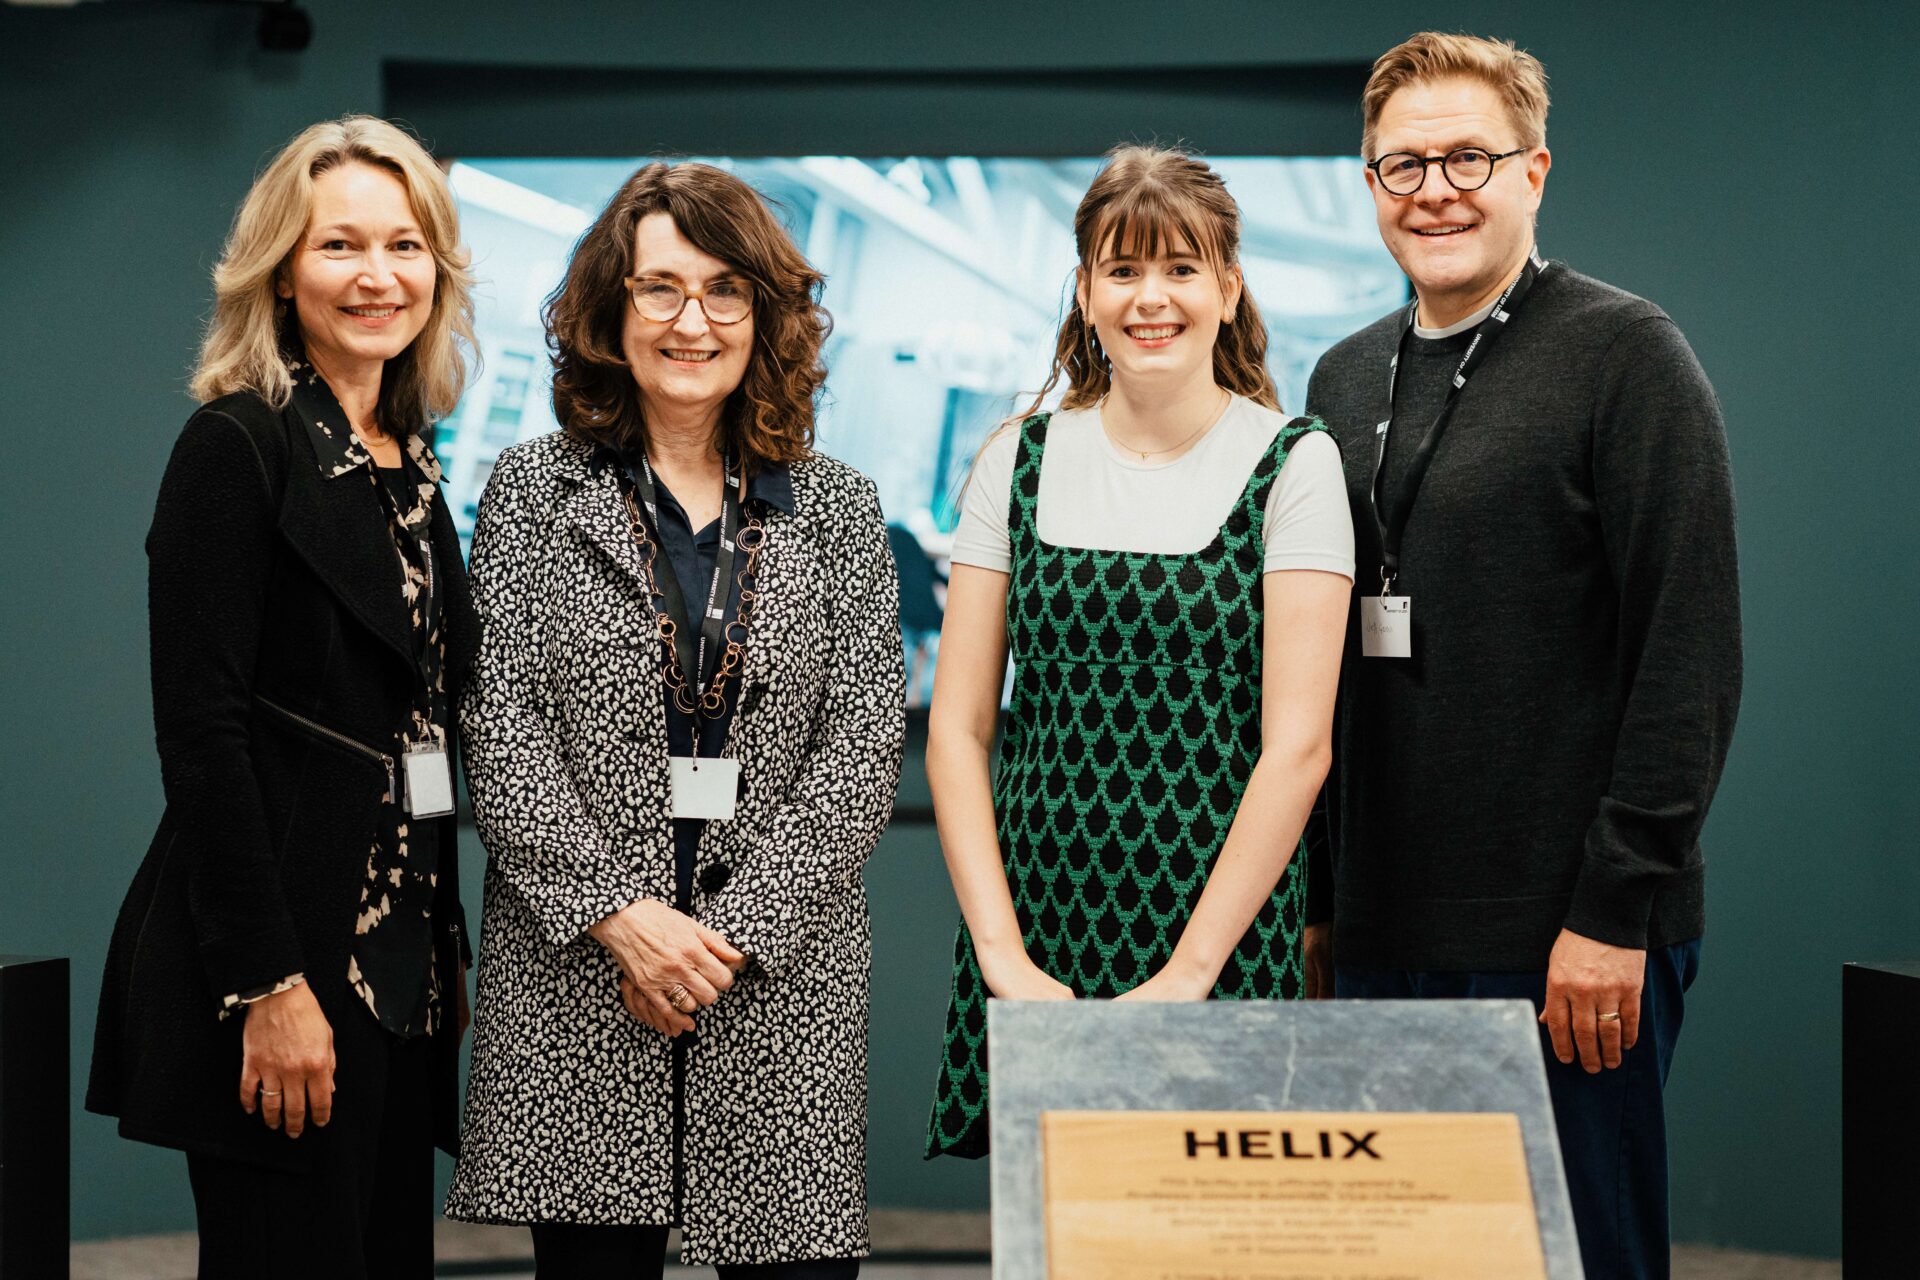 Margaret Korosec, Simone Buitendijk, Bethan Corner and Jeff Grabill pose by the OmniDeck with the HELIX opening plaque